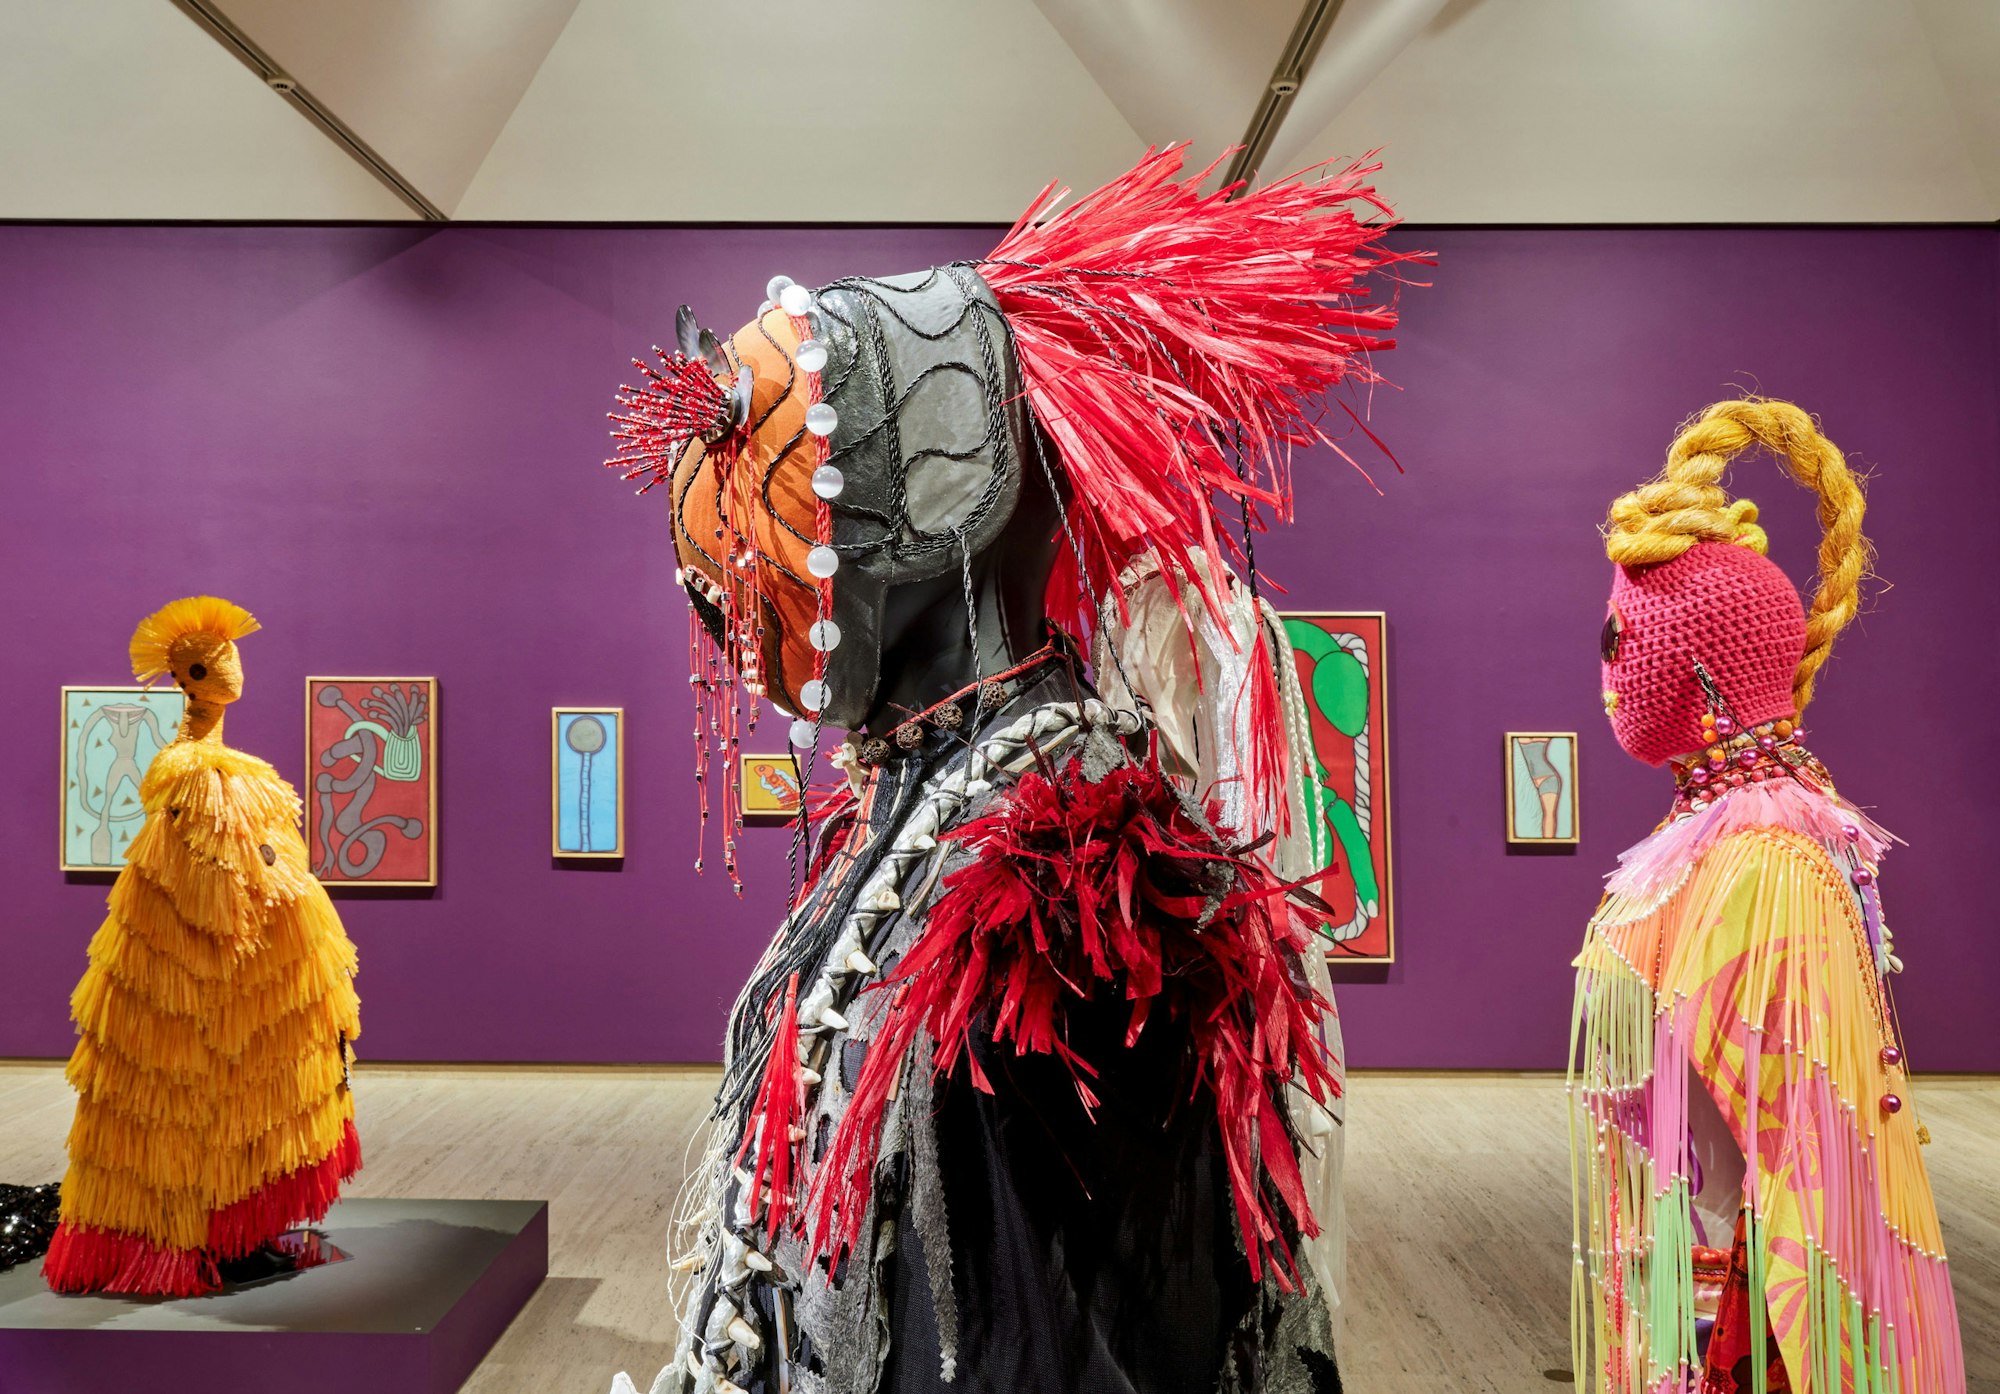 Sculptural figures in colourful costumes stand in a gallery space with paintings hanging on a purple wall